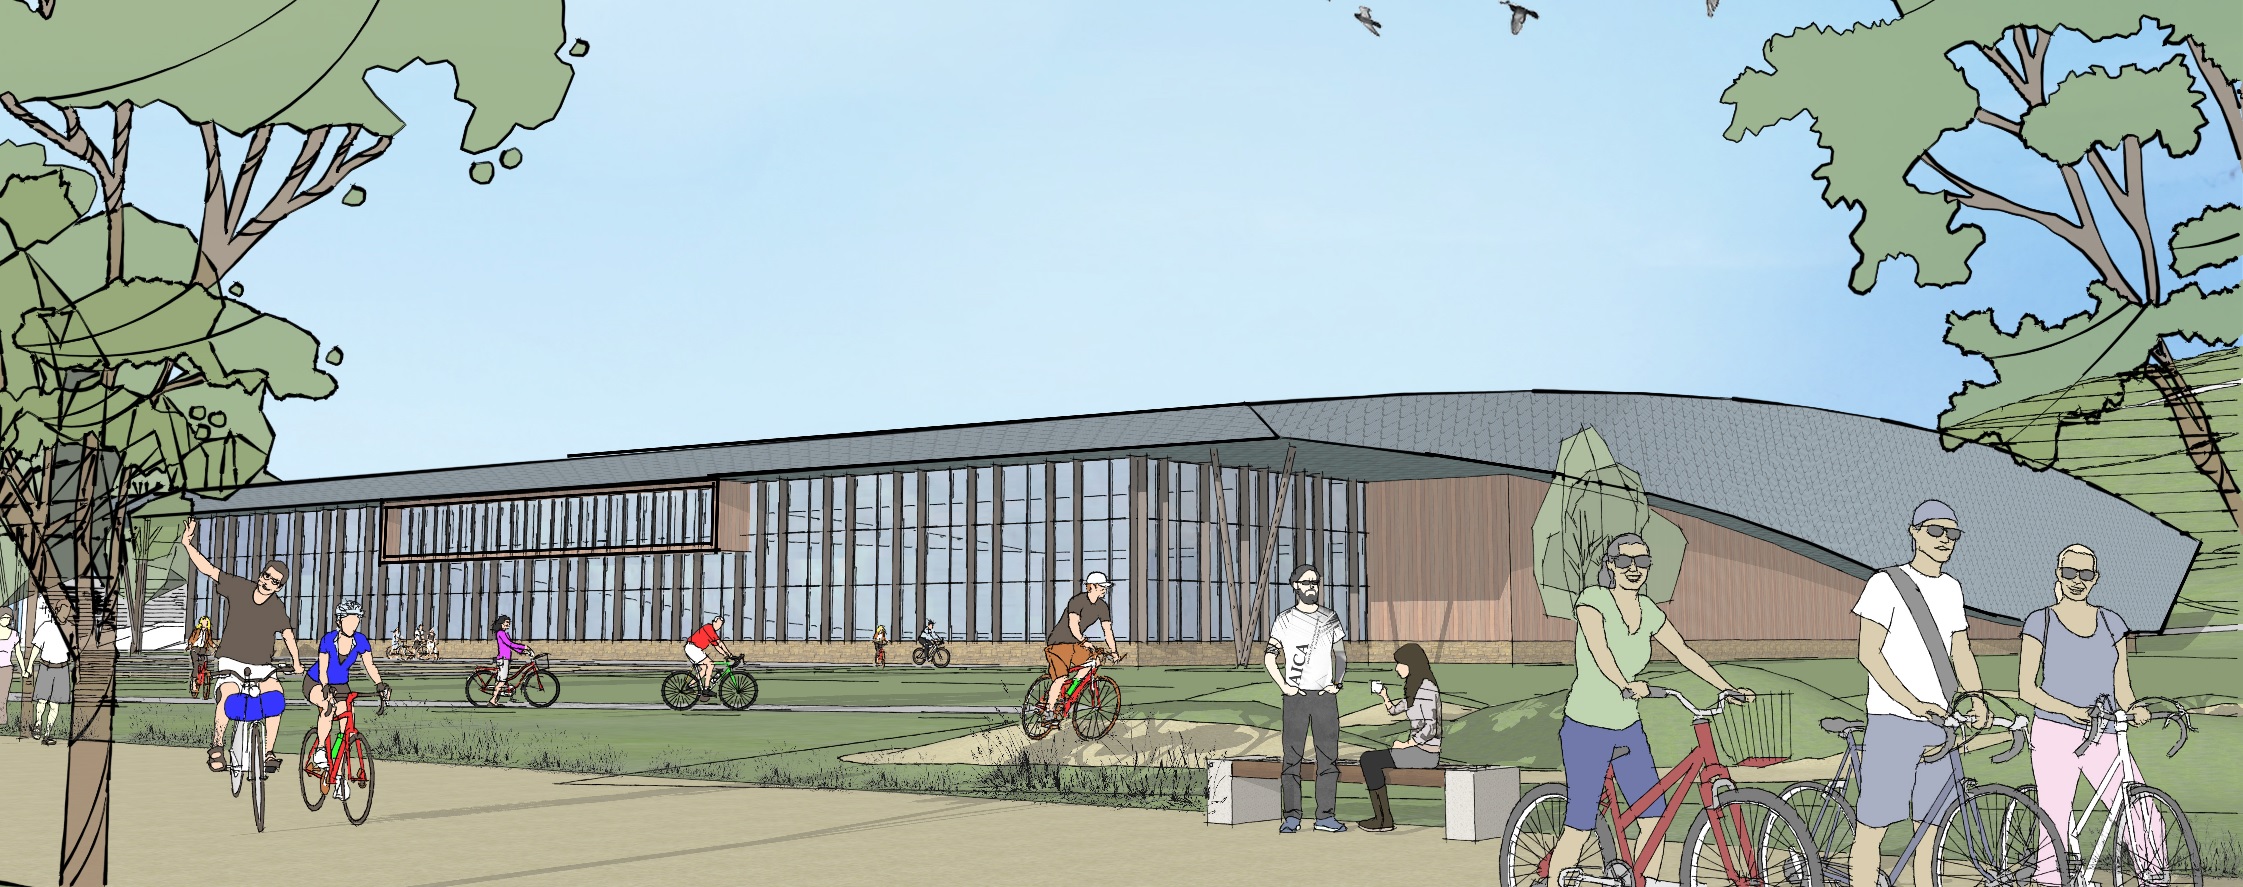 A concept sketch of a multi-use cycling centre as recommended in the Cycling Infrastructure Business Case.